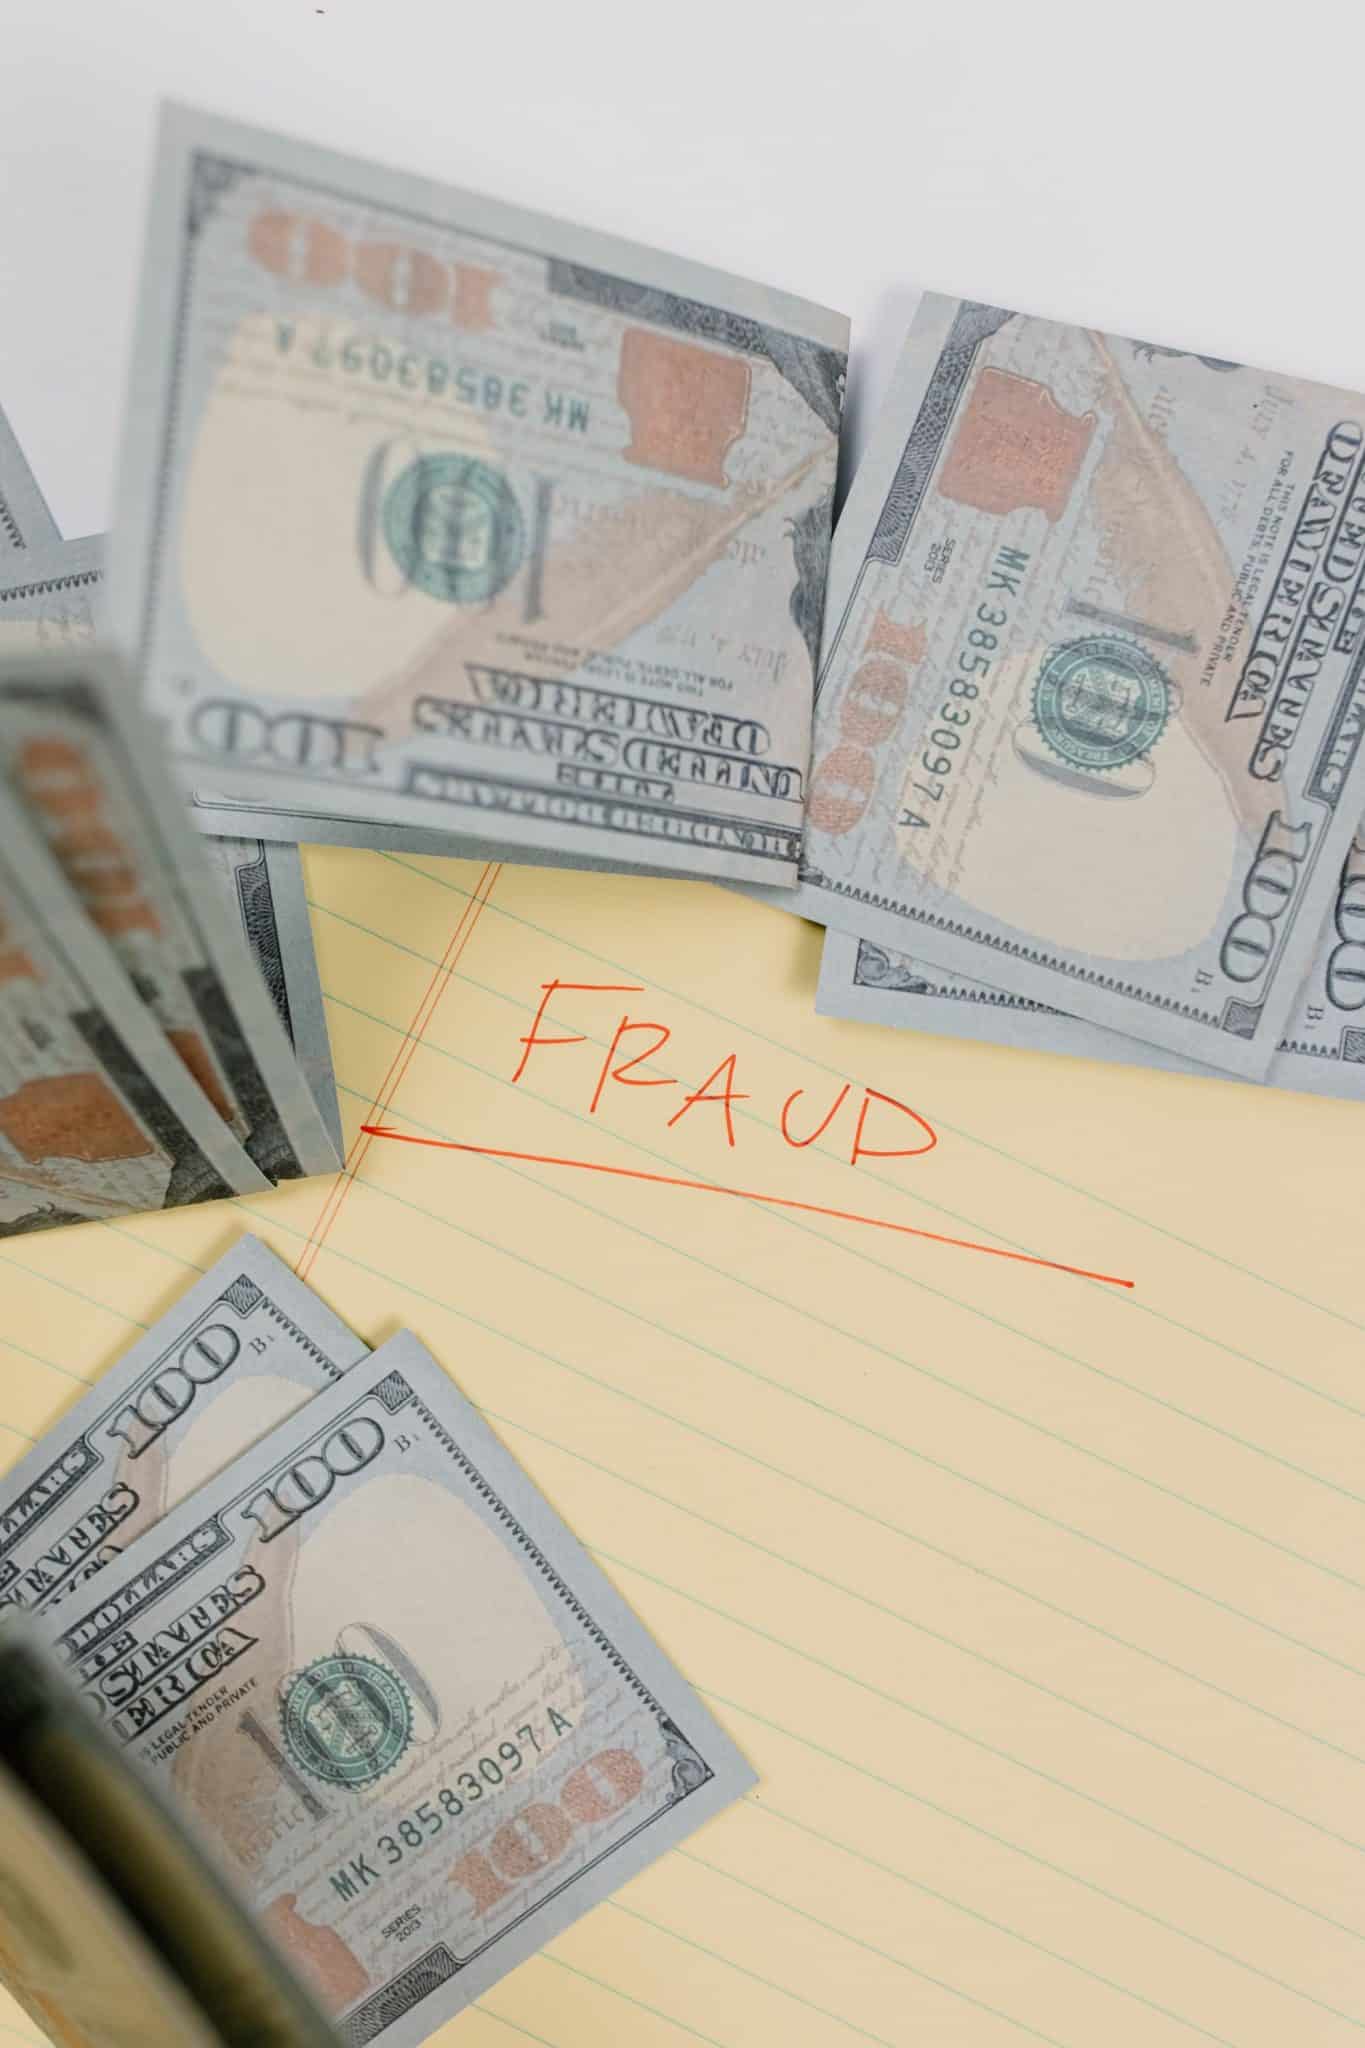 How to Detect Financial Statement Fraud